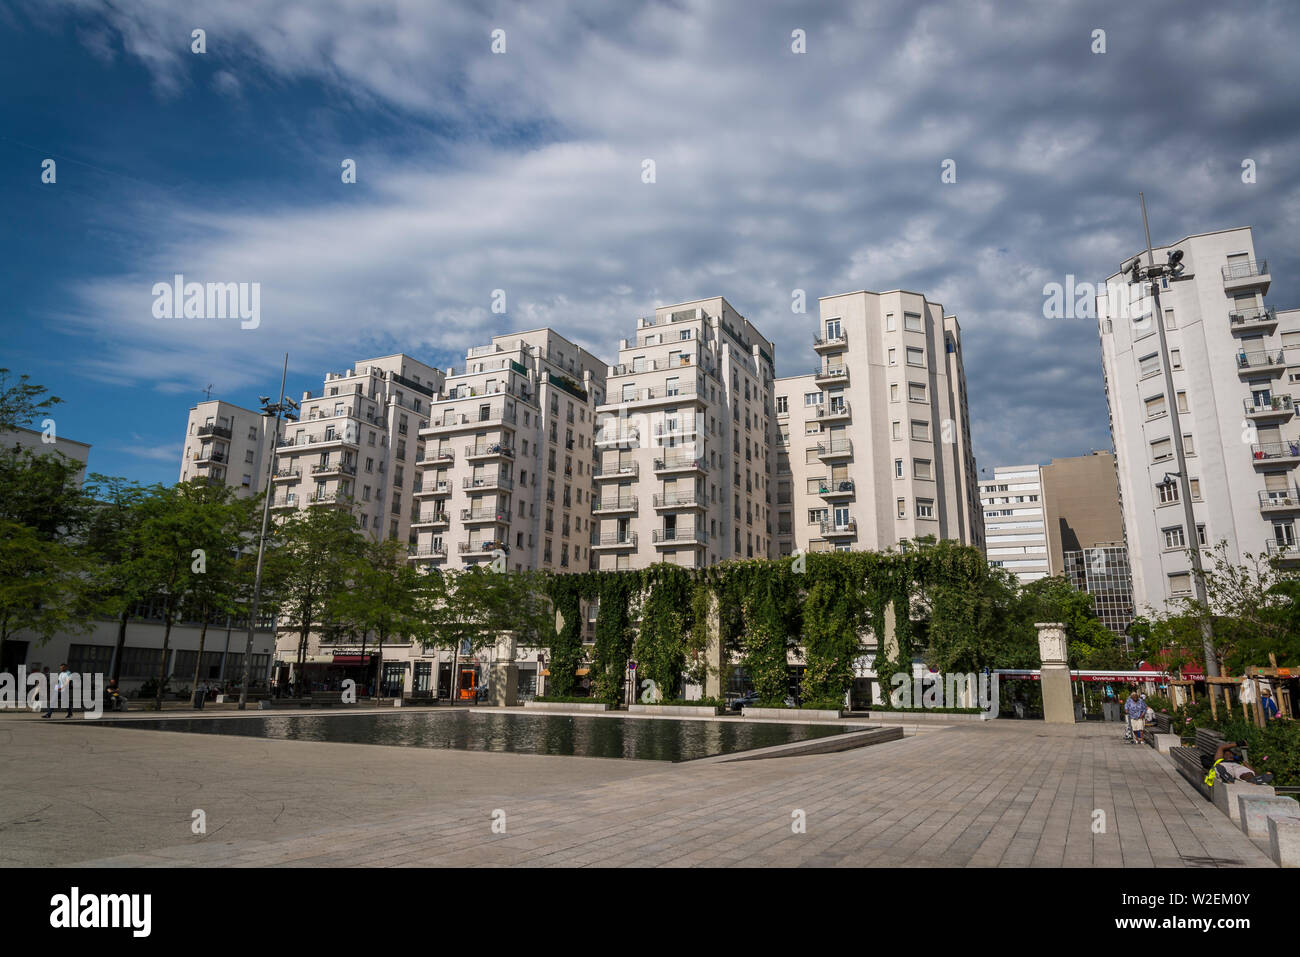 Villeurbanne architecture, a modernist architectural ensemble located in the municipality of Villeurbanne built in the 1930s as social housing for wor Stock Photo